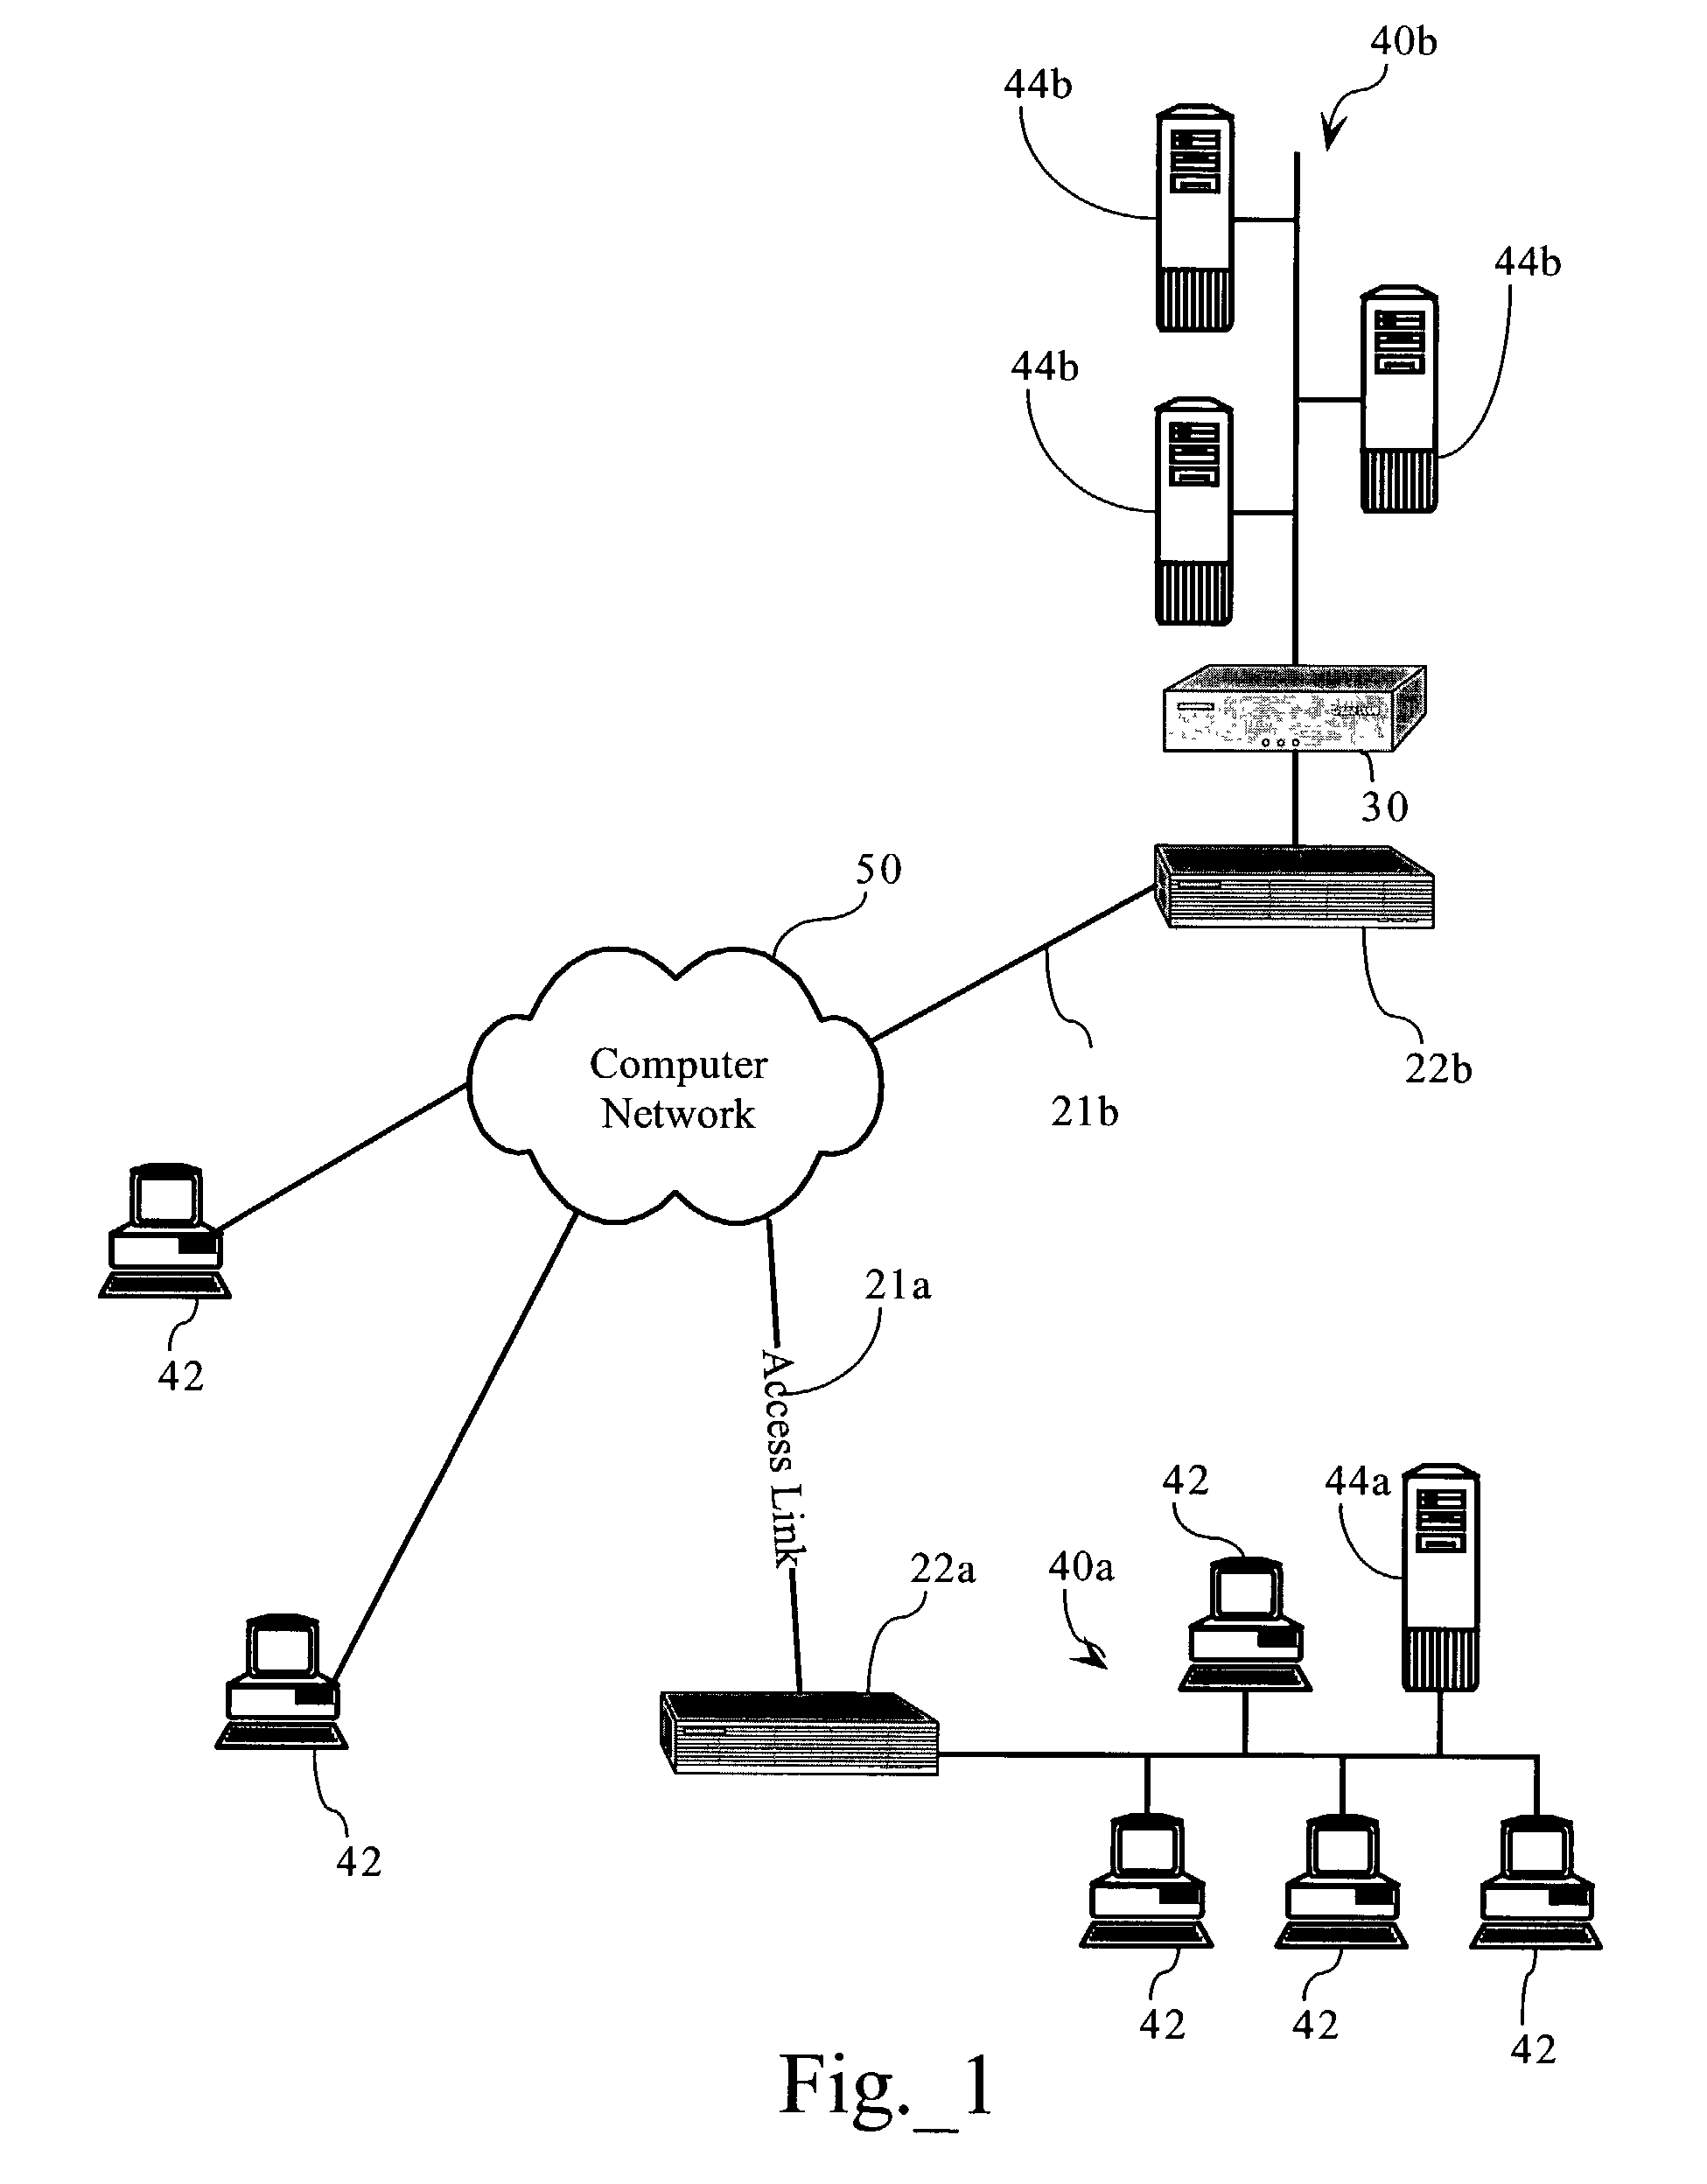 Methods, apparatuses and systems for transparently intermediating network traffic over connection-based authentication protocols